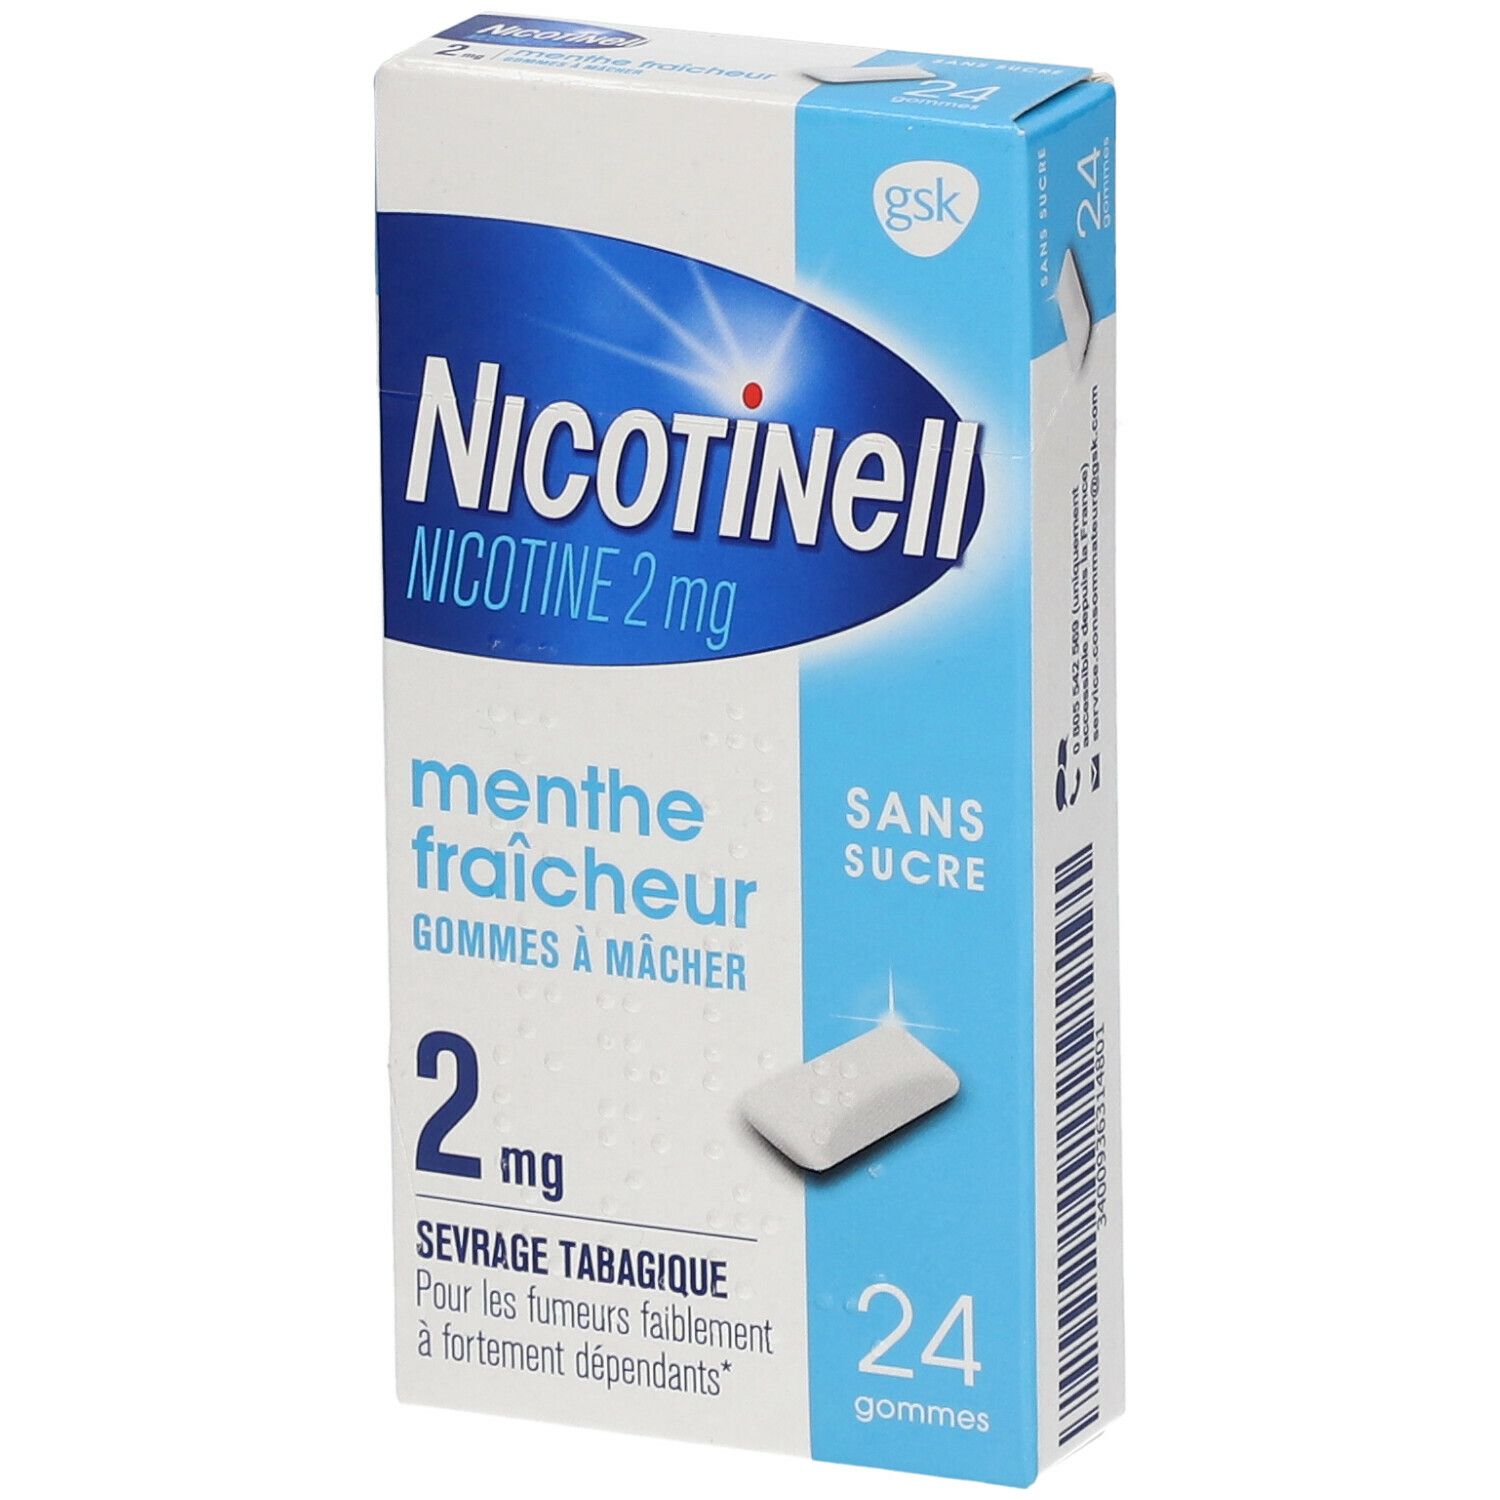 Nicotinell® Menthe fraicheur s/s 2 mg